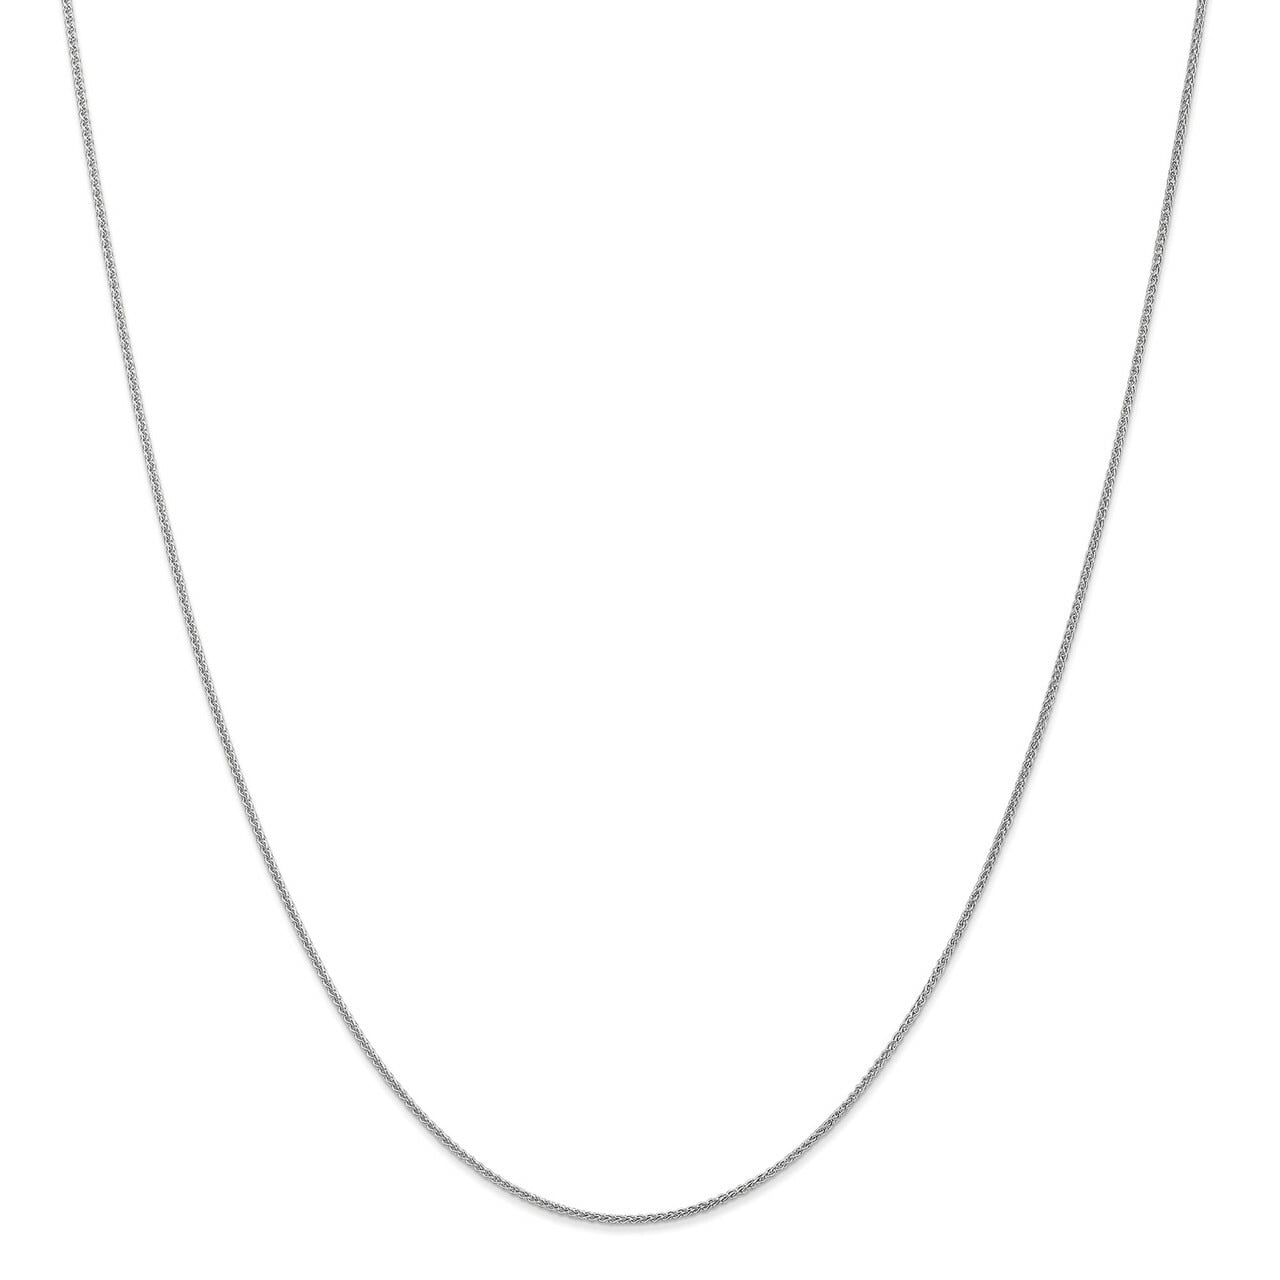 Lex & Lu Sterling Silver 1.40mm Singapore Chain Necklace